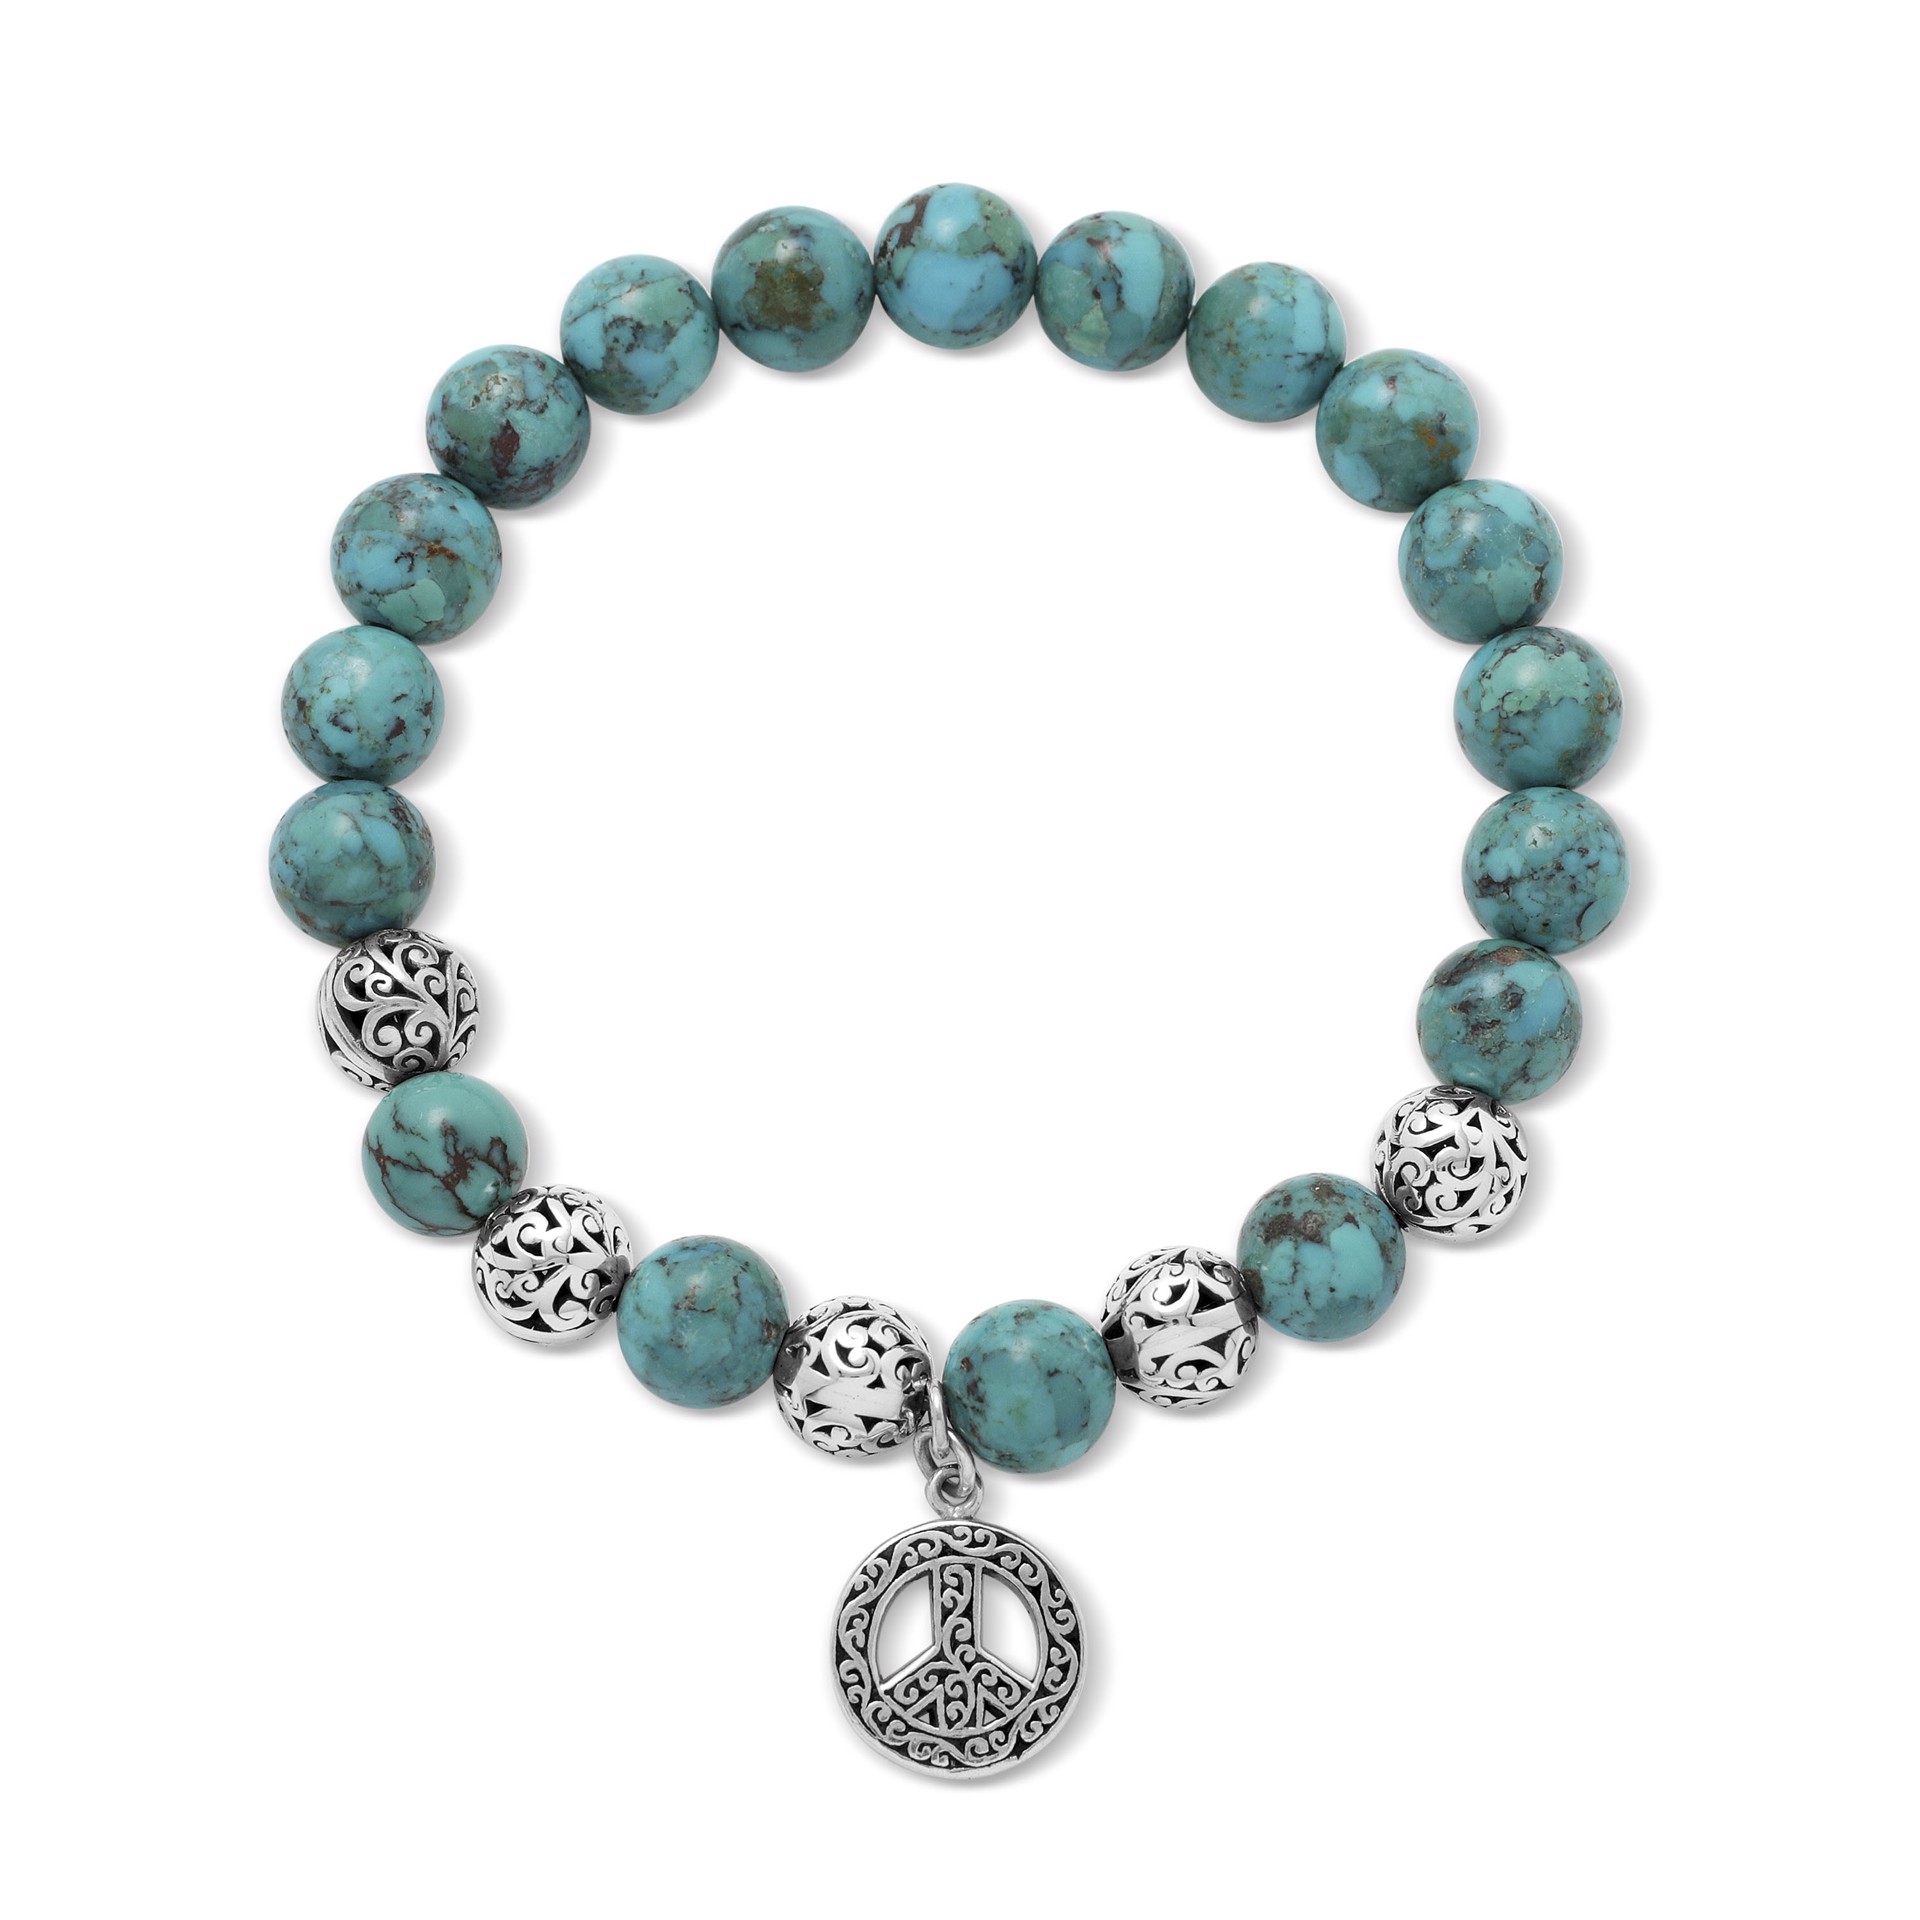 9649 Blue Black Turquoise & LH Scroll Beads (8mm) Stretch Bracelet with Peace Sign Charm by Lois Hill